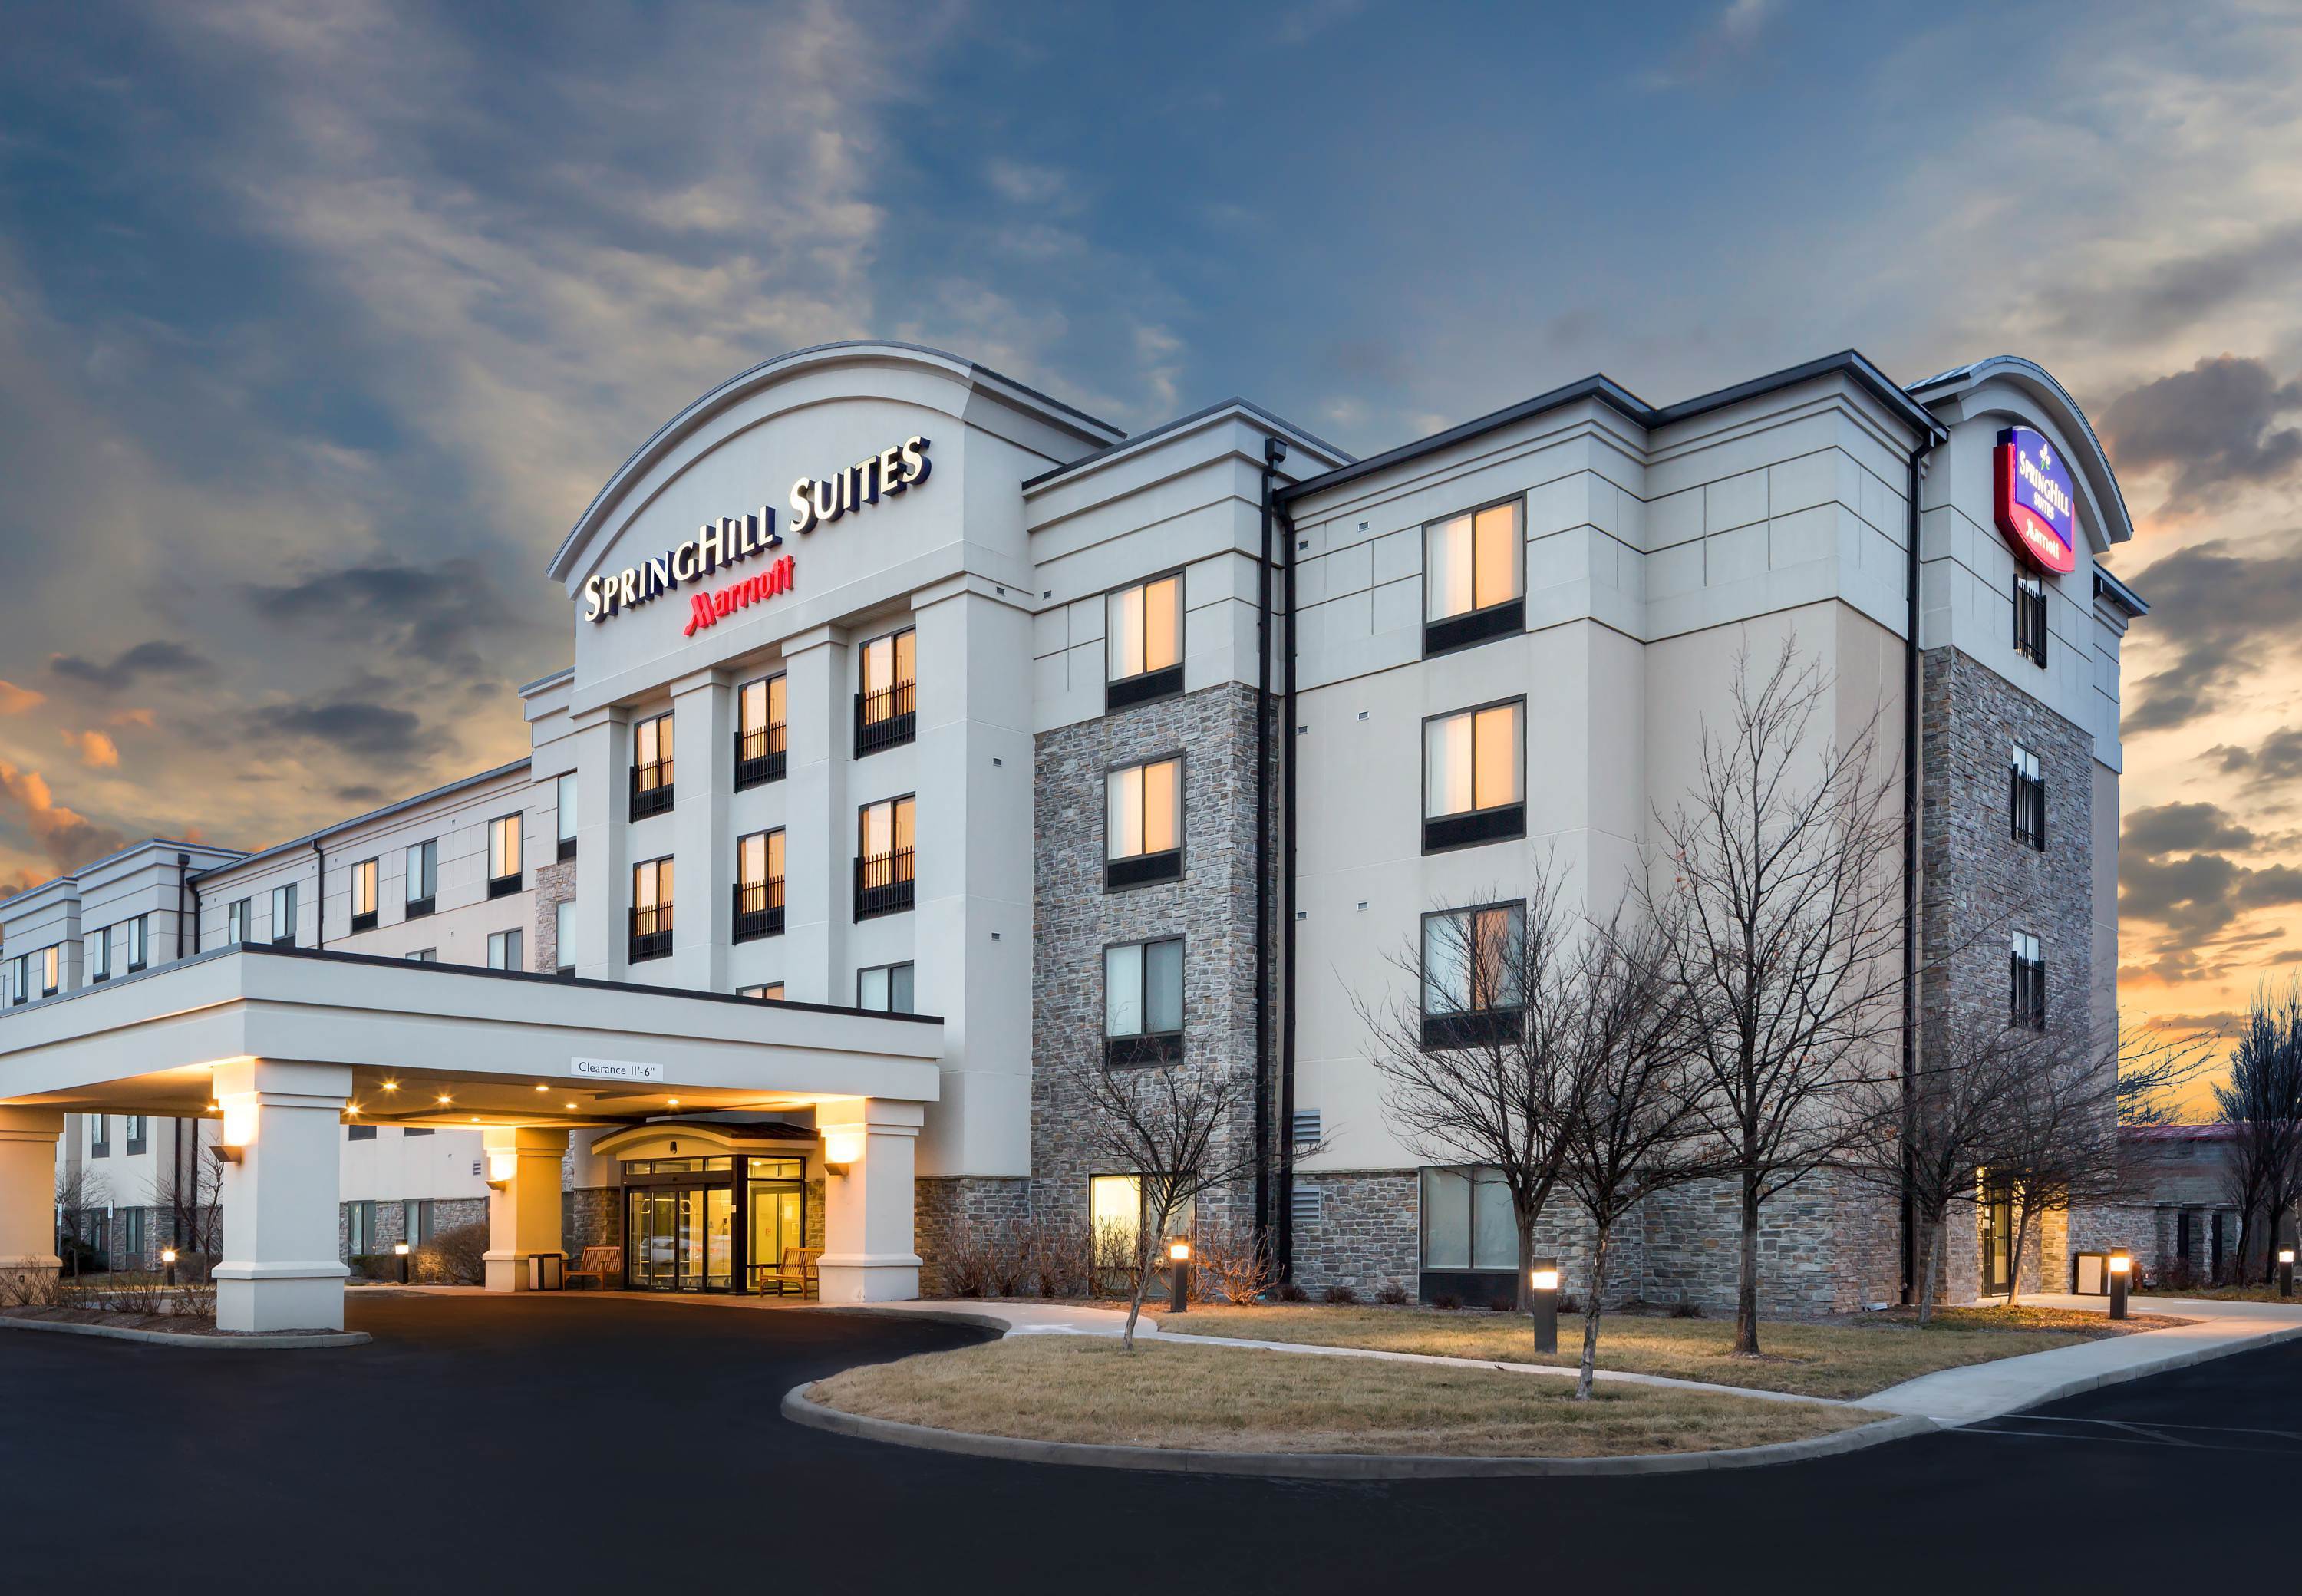 Photo of SpringHill Suites by Marriott Indianapolis Fishers, Indianapolis, IN